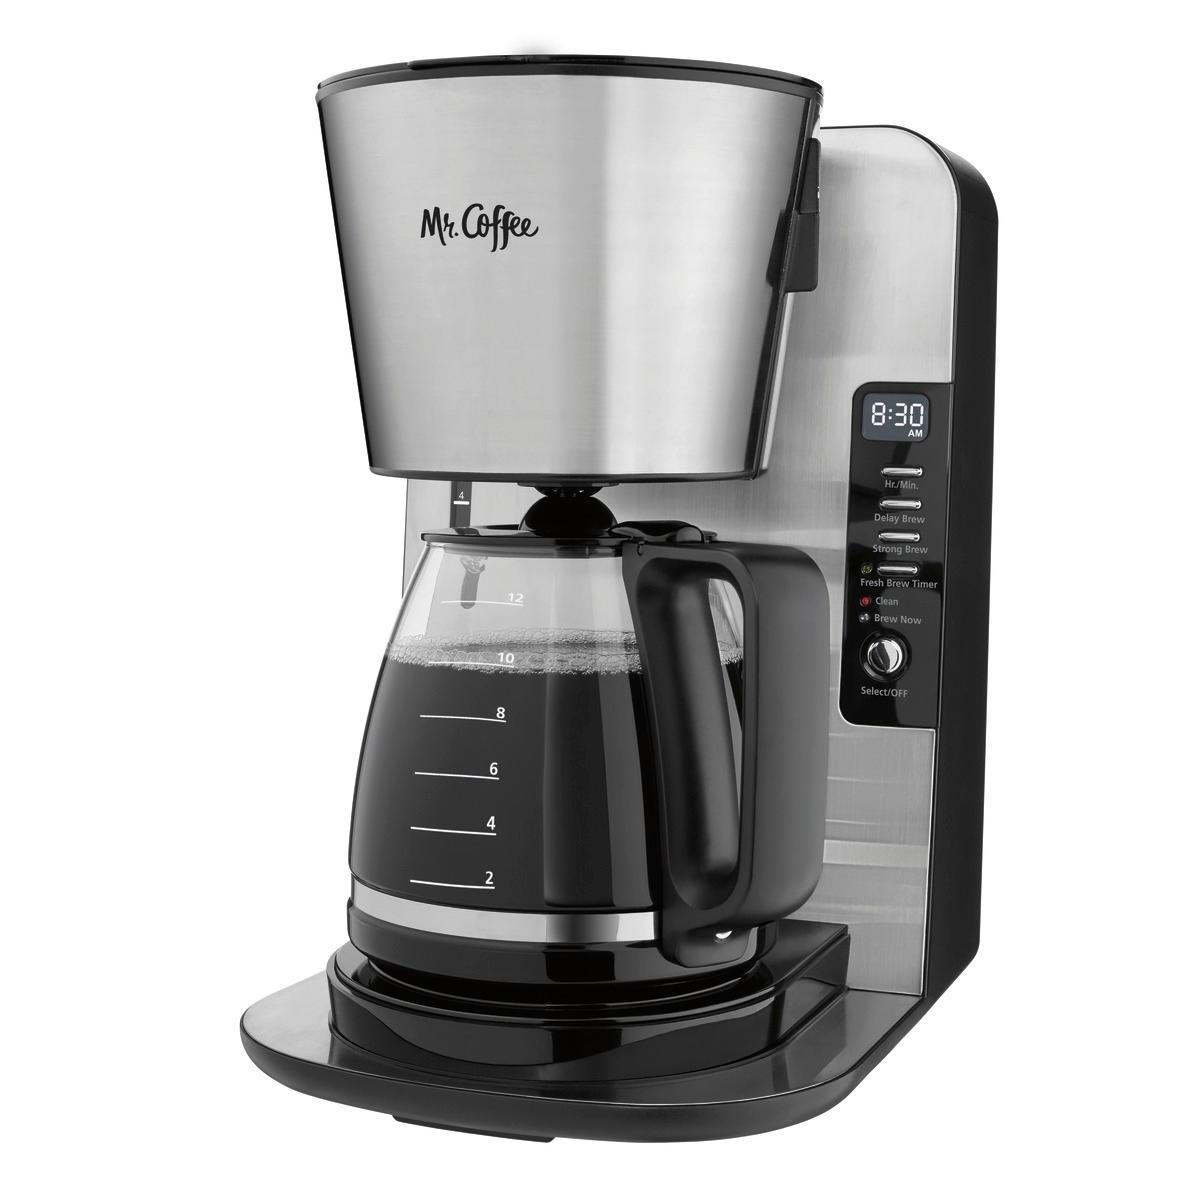 Mr. Coffee 12-Cup Coffee Maker with Dishwashable Design Black/Chrome  2097746 - Best Buy